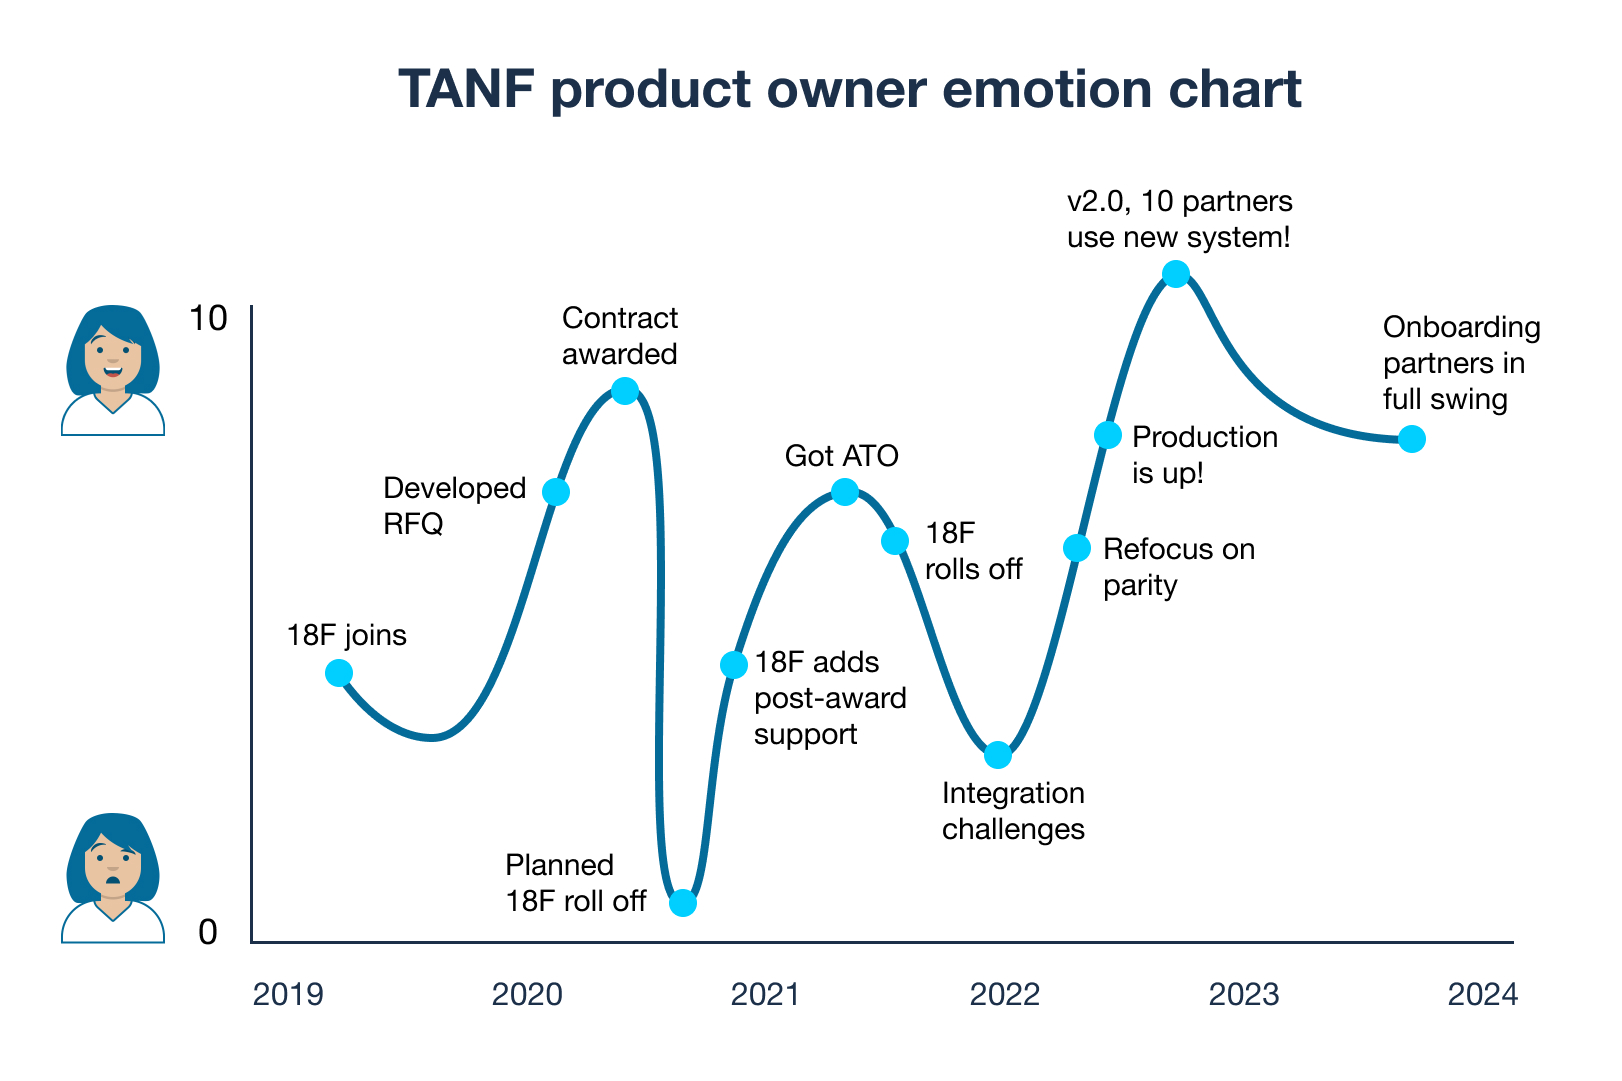 A line chart showing the emotional highs and lows of the TANF product owner over 5 years. The highs include the contract getting awarded and getting the ATO, followed by the first 10 partners using the new system. Emotions are at their lowest at the planned 18F roll off, and integration challenges afterwards. The emotions are consistently high when onboarding partners is in full swing.